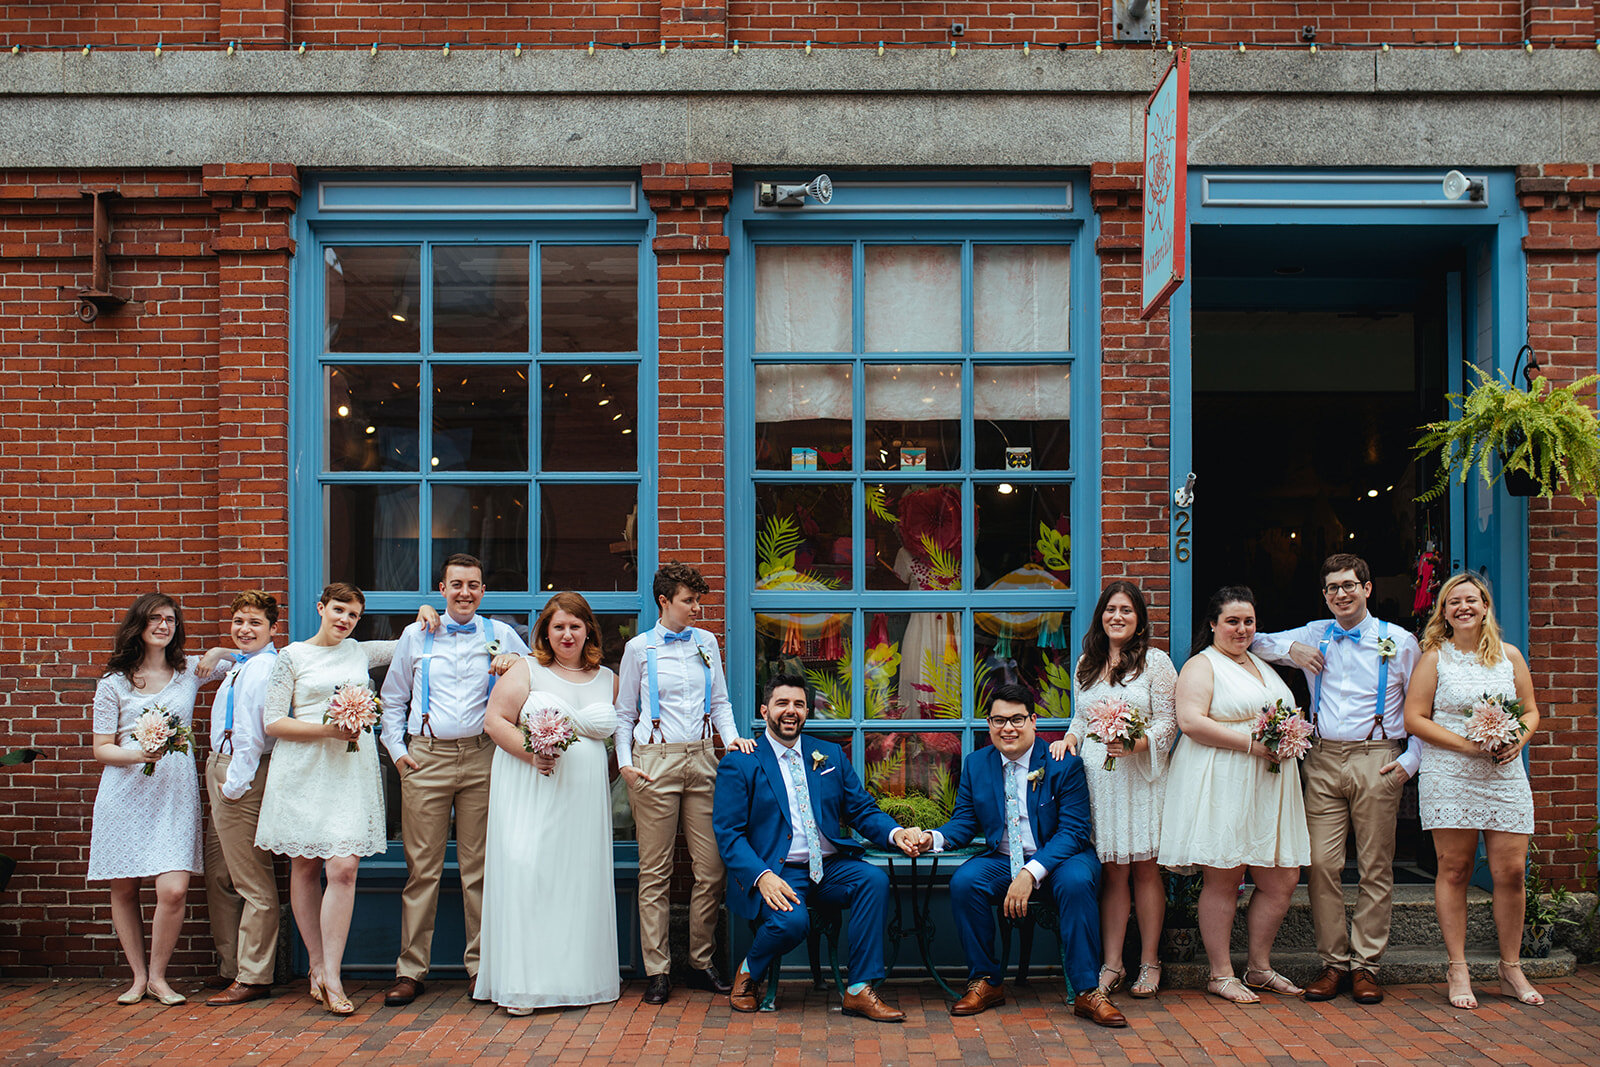 Two grooms posing with wedding party in Portland ME Shawnee Custalow Queer wedding photography